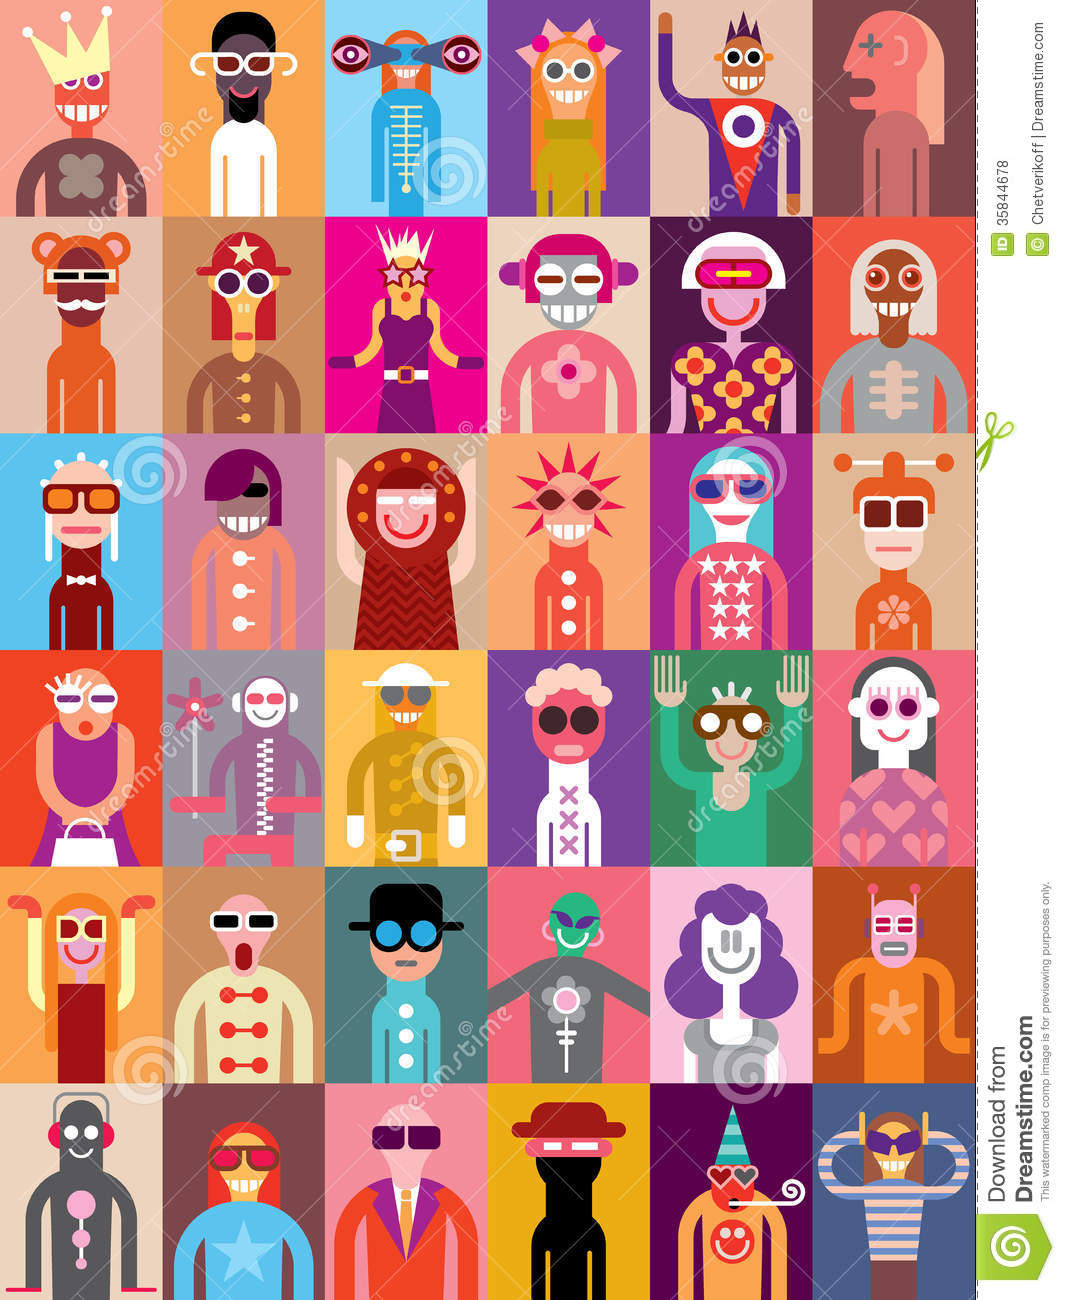 Abstract People Vector Illustration